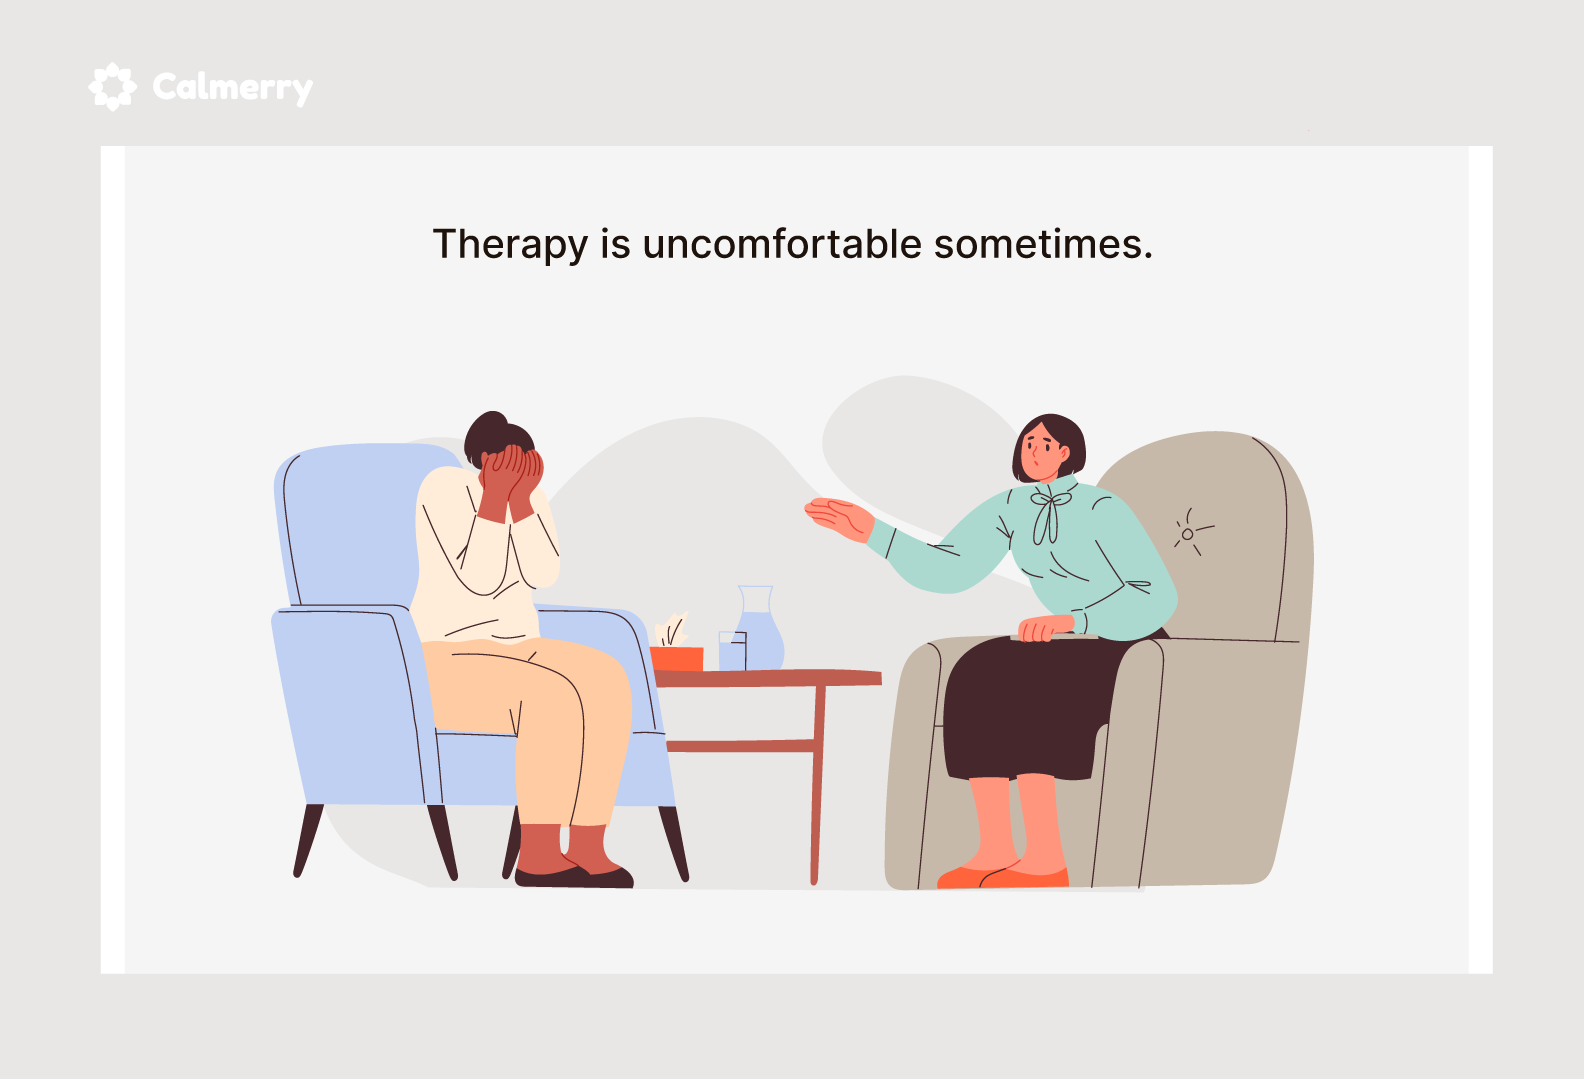 Therapy is uncomfortable sometimes